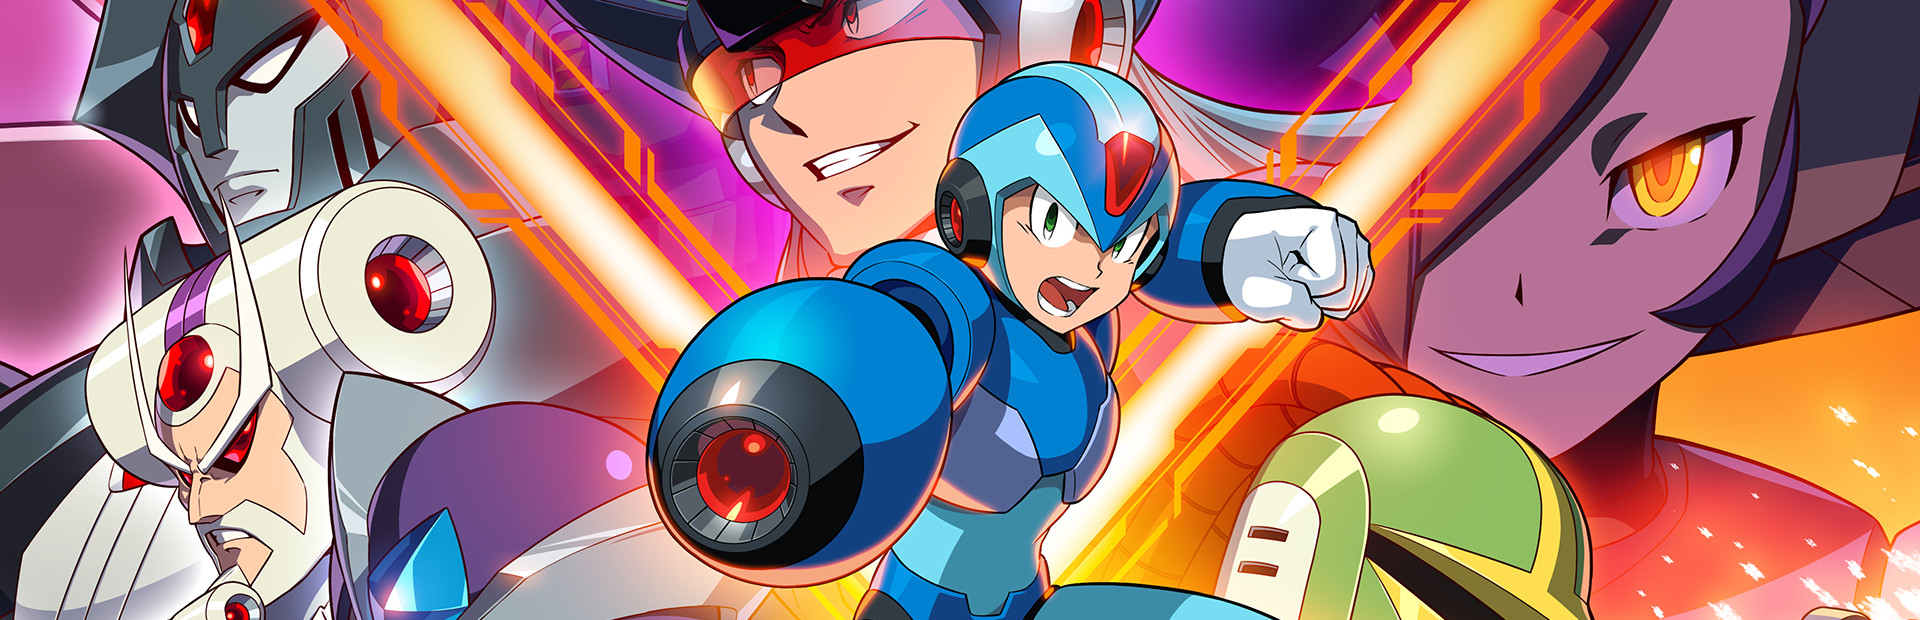 Mega Man X Legacy Collection 2 cover image